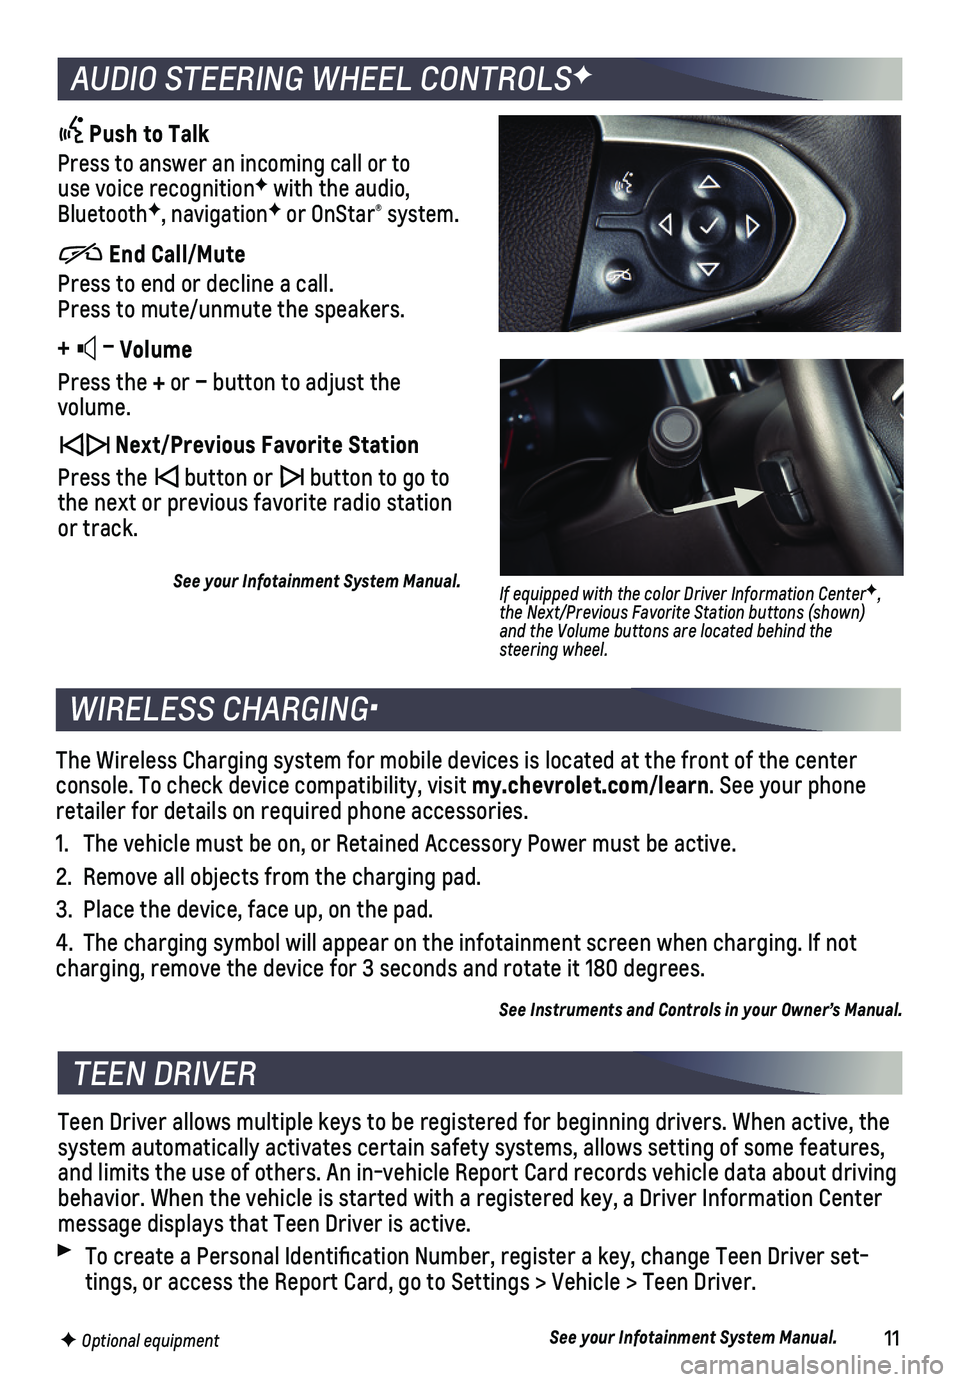 CHEVROLET COLORADO 2019  Get To Know Guide 11
The Wireless Charging system for mobile devices is located at the front \
of the center console. To check device compatibility, visit my.chevrolet.com/learn. See your phone retailer for details on 